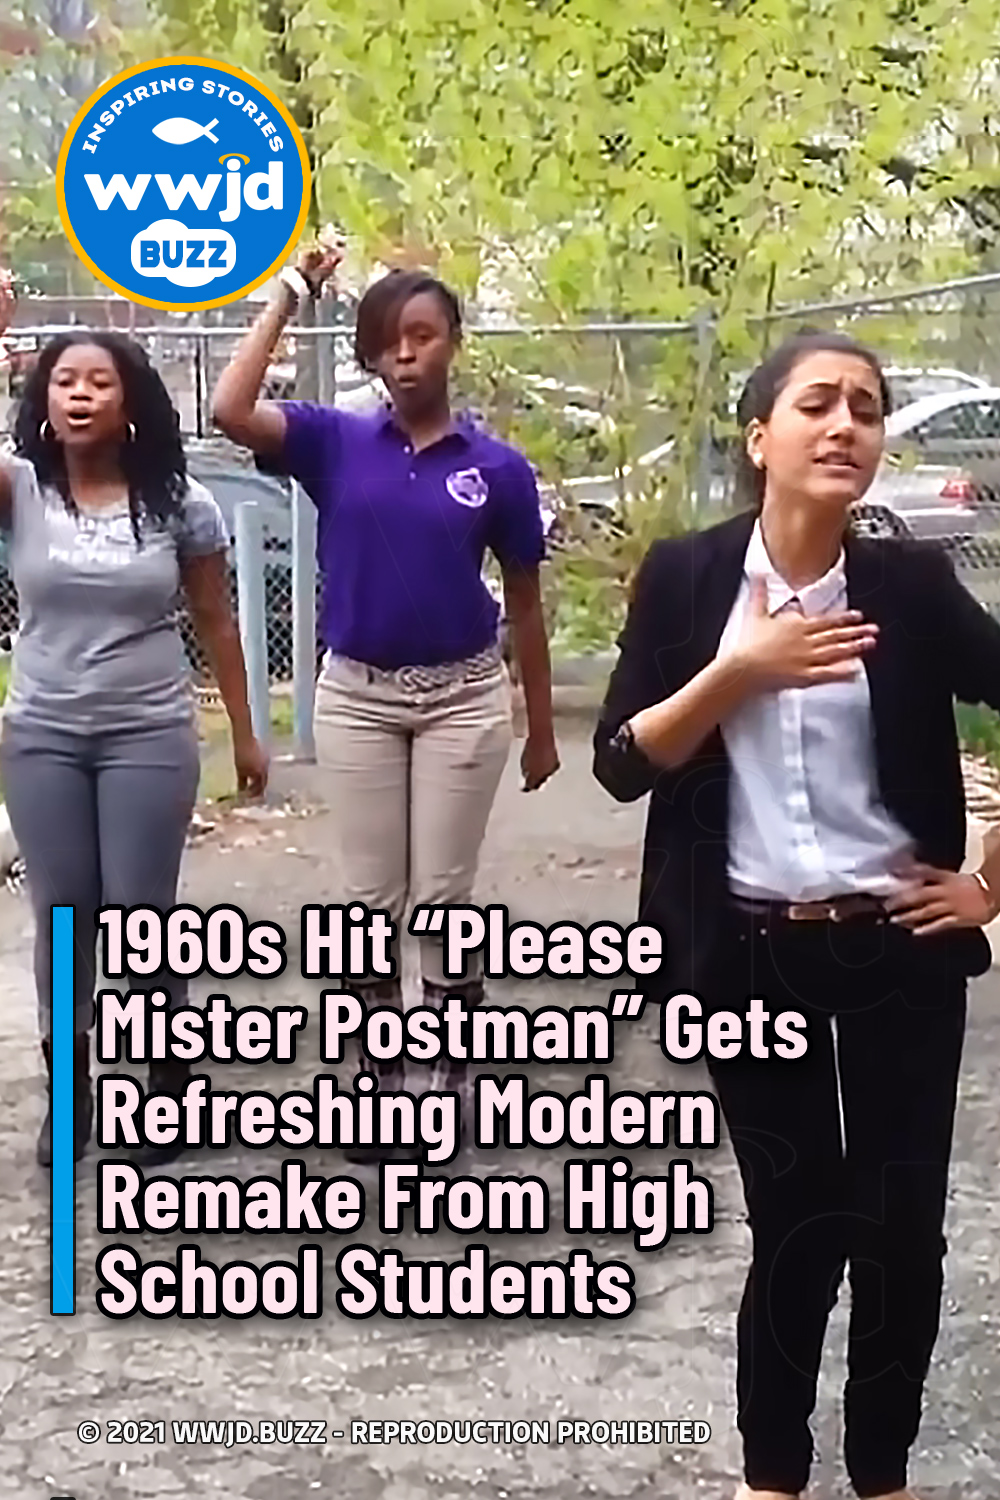 1960s Hit “Please Mister Postman” Gets Refreshing Modern Remake From High School Students